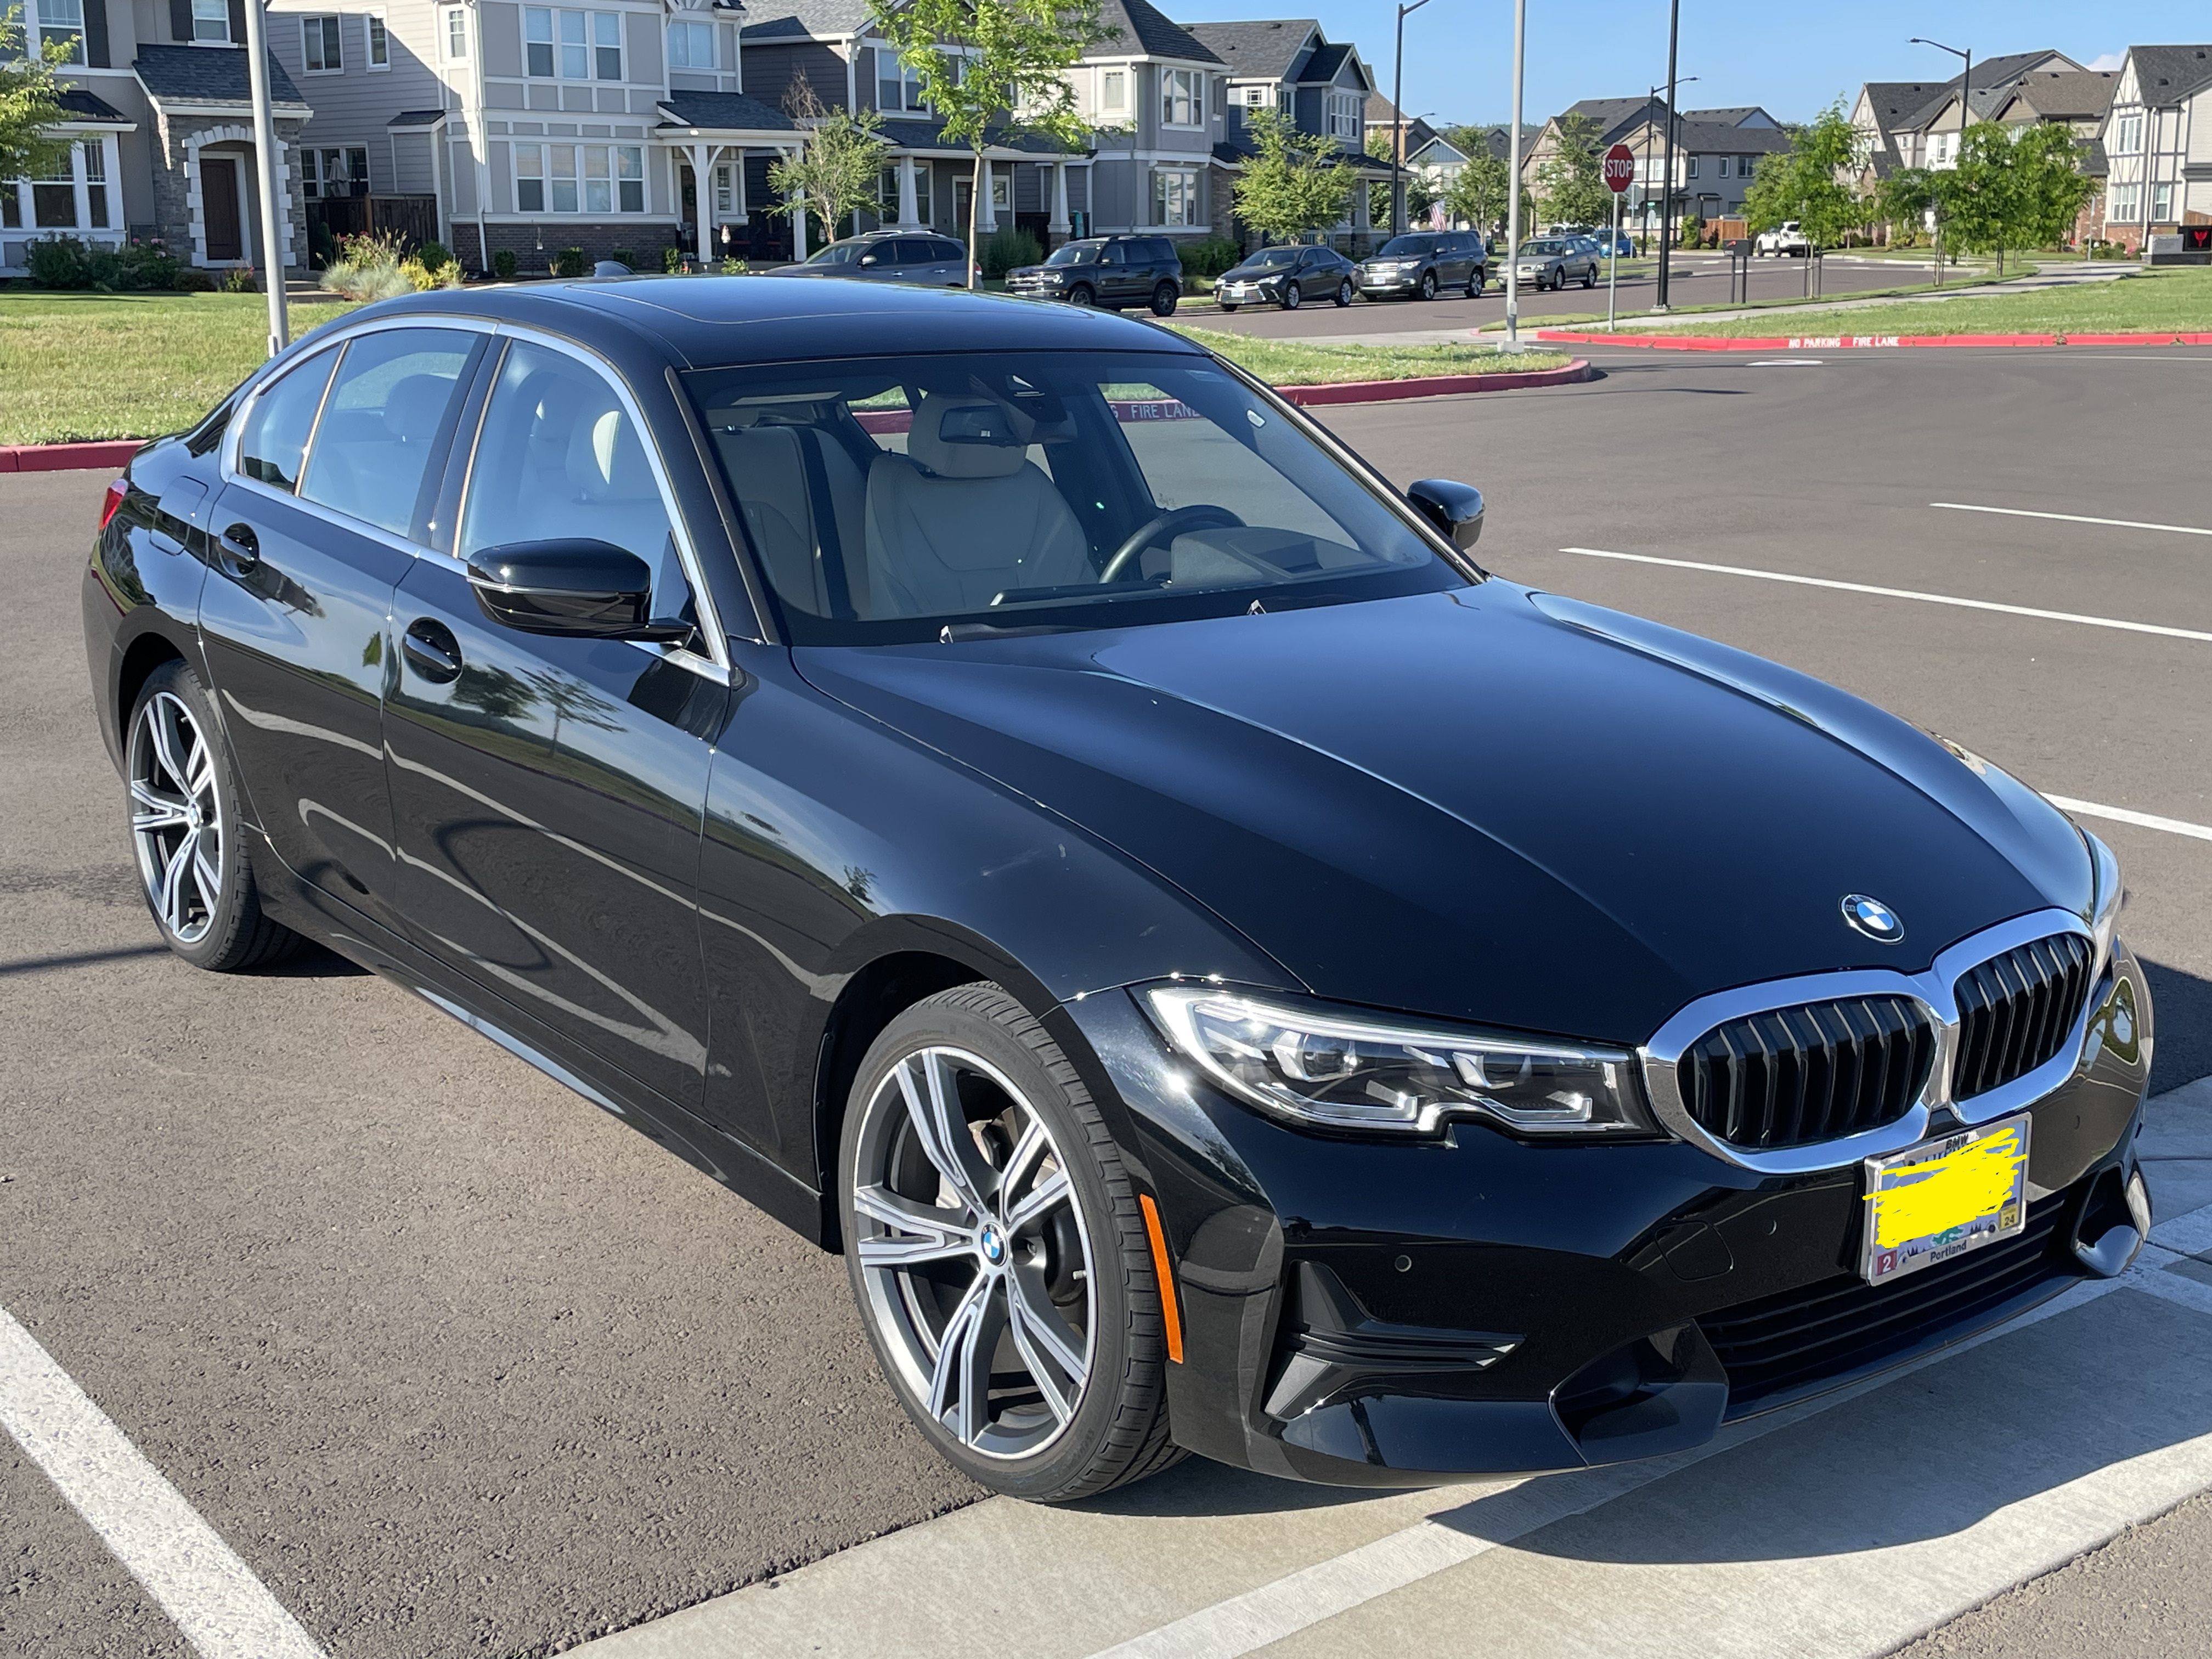 Used 2019 BMW 330i xDrive for Sale Right Now - Autotrader